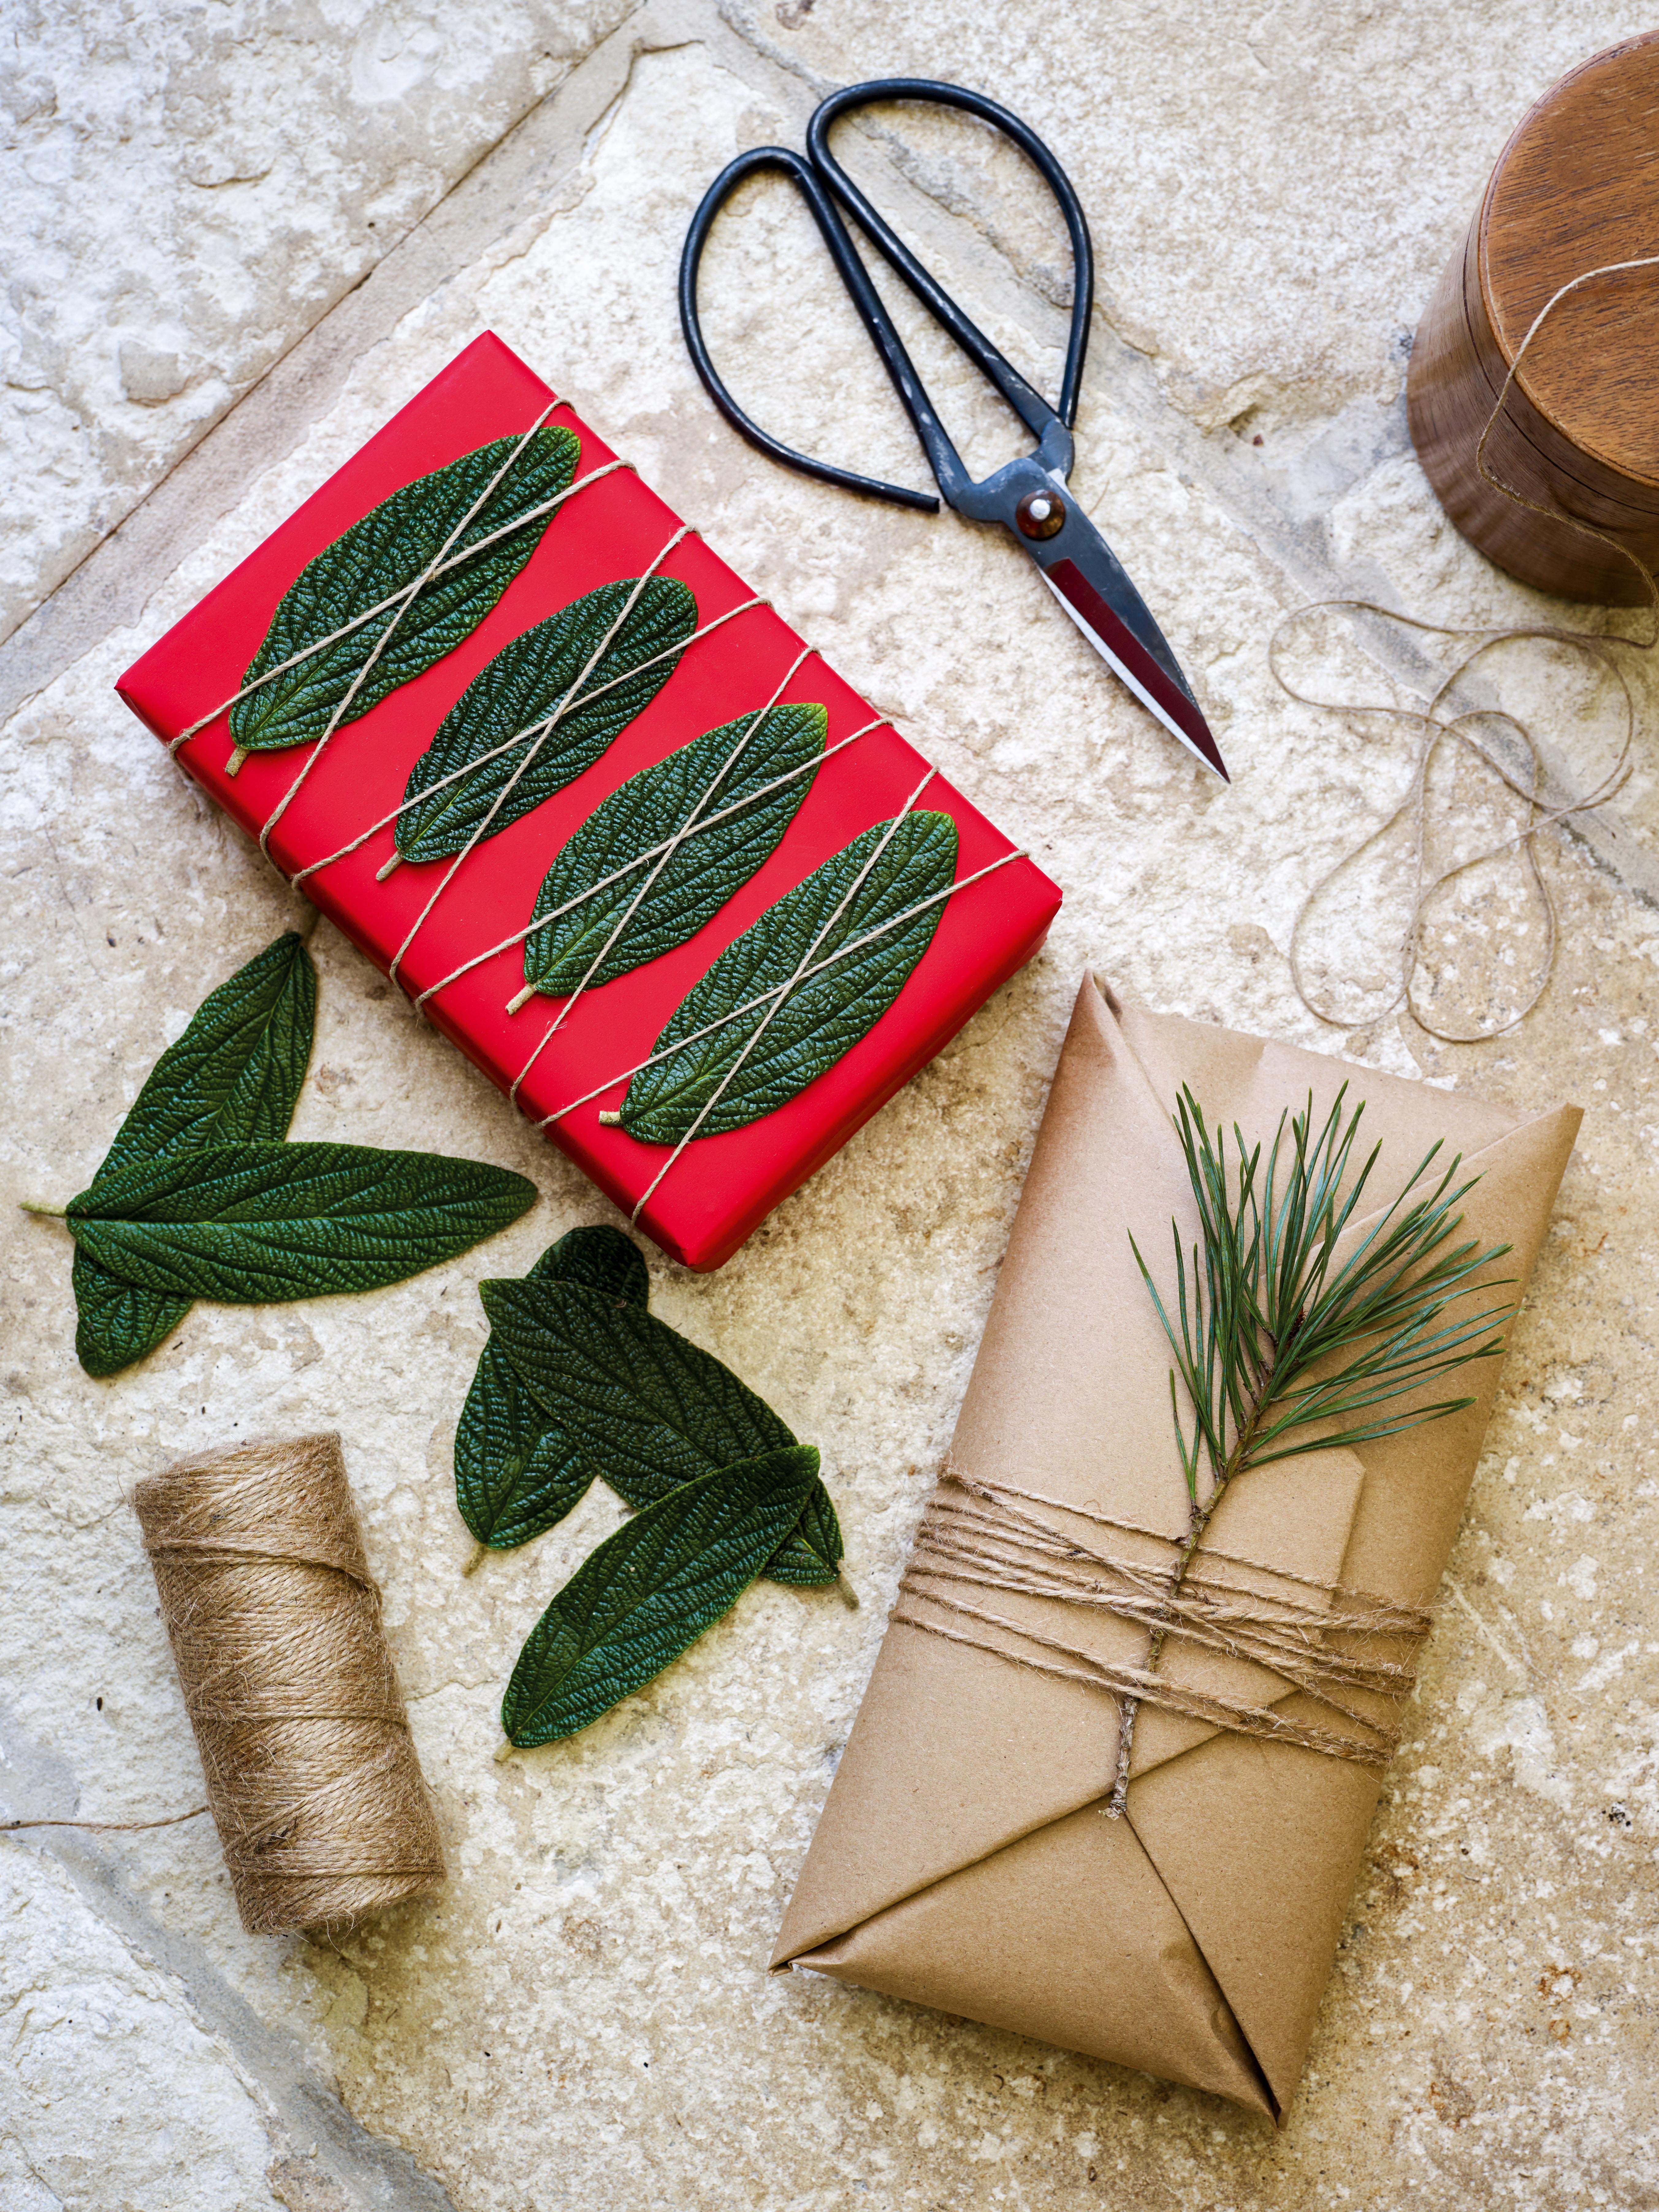 60 Best Christmas Gift Wrapping Ideas That Are Easy to DIY